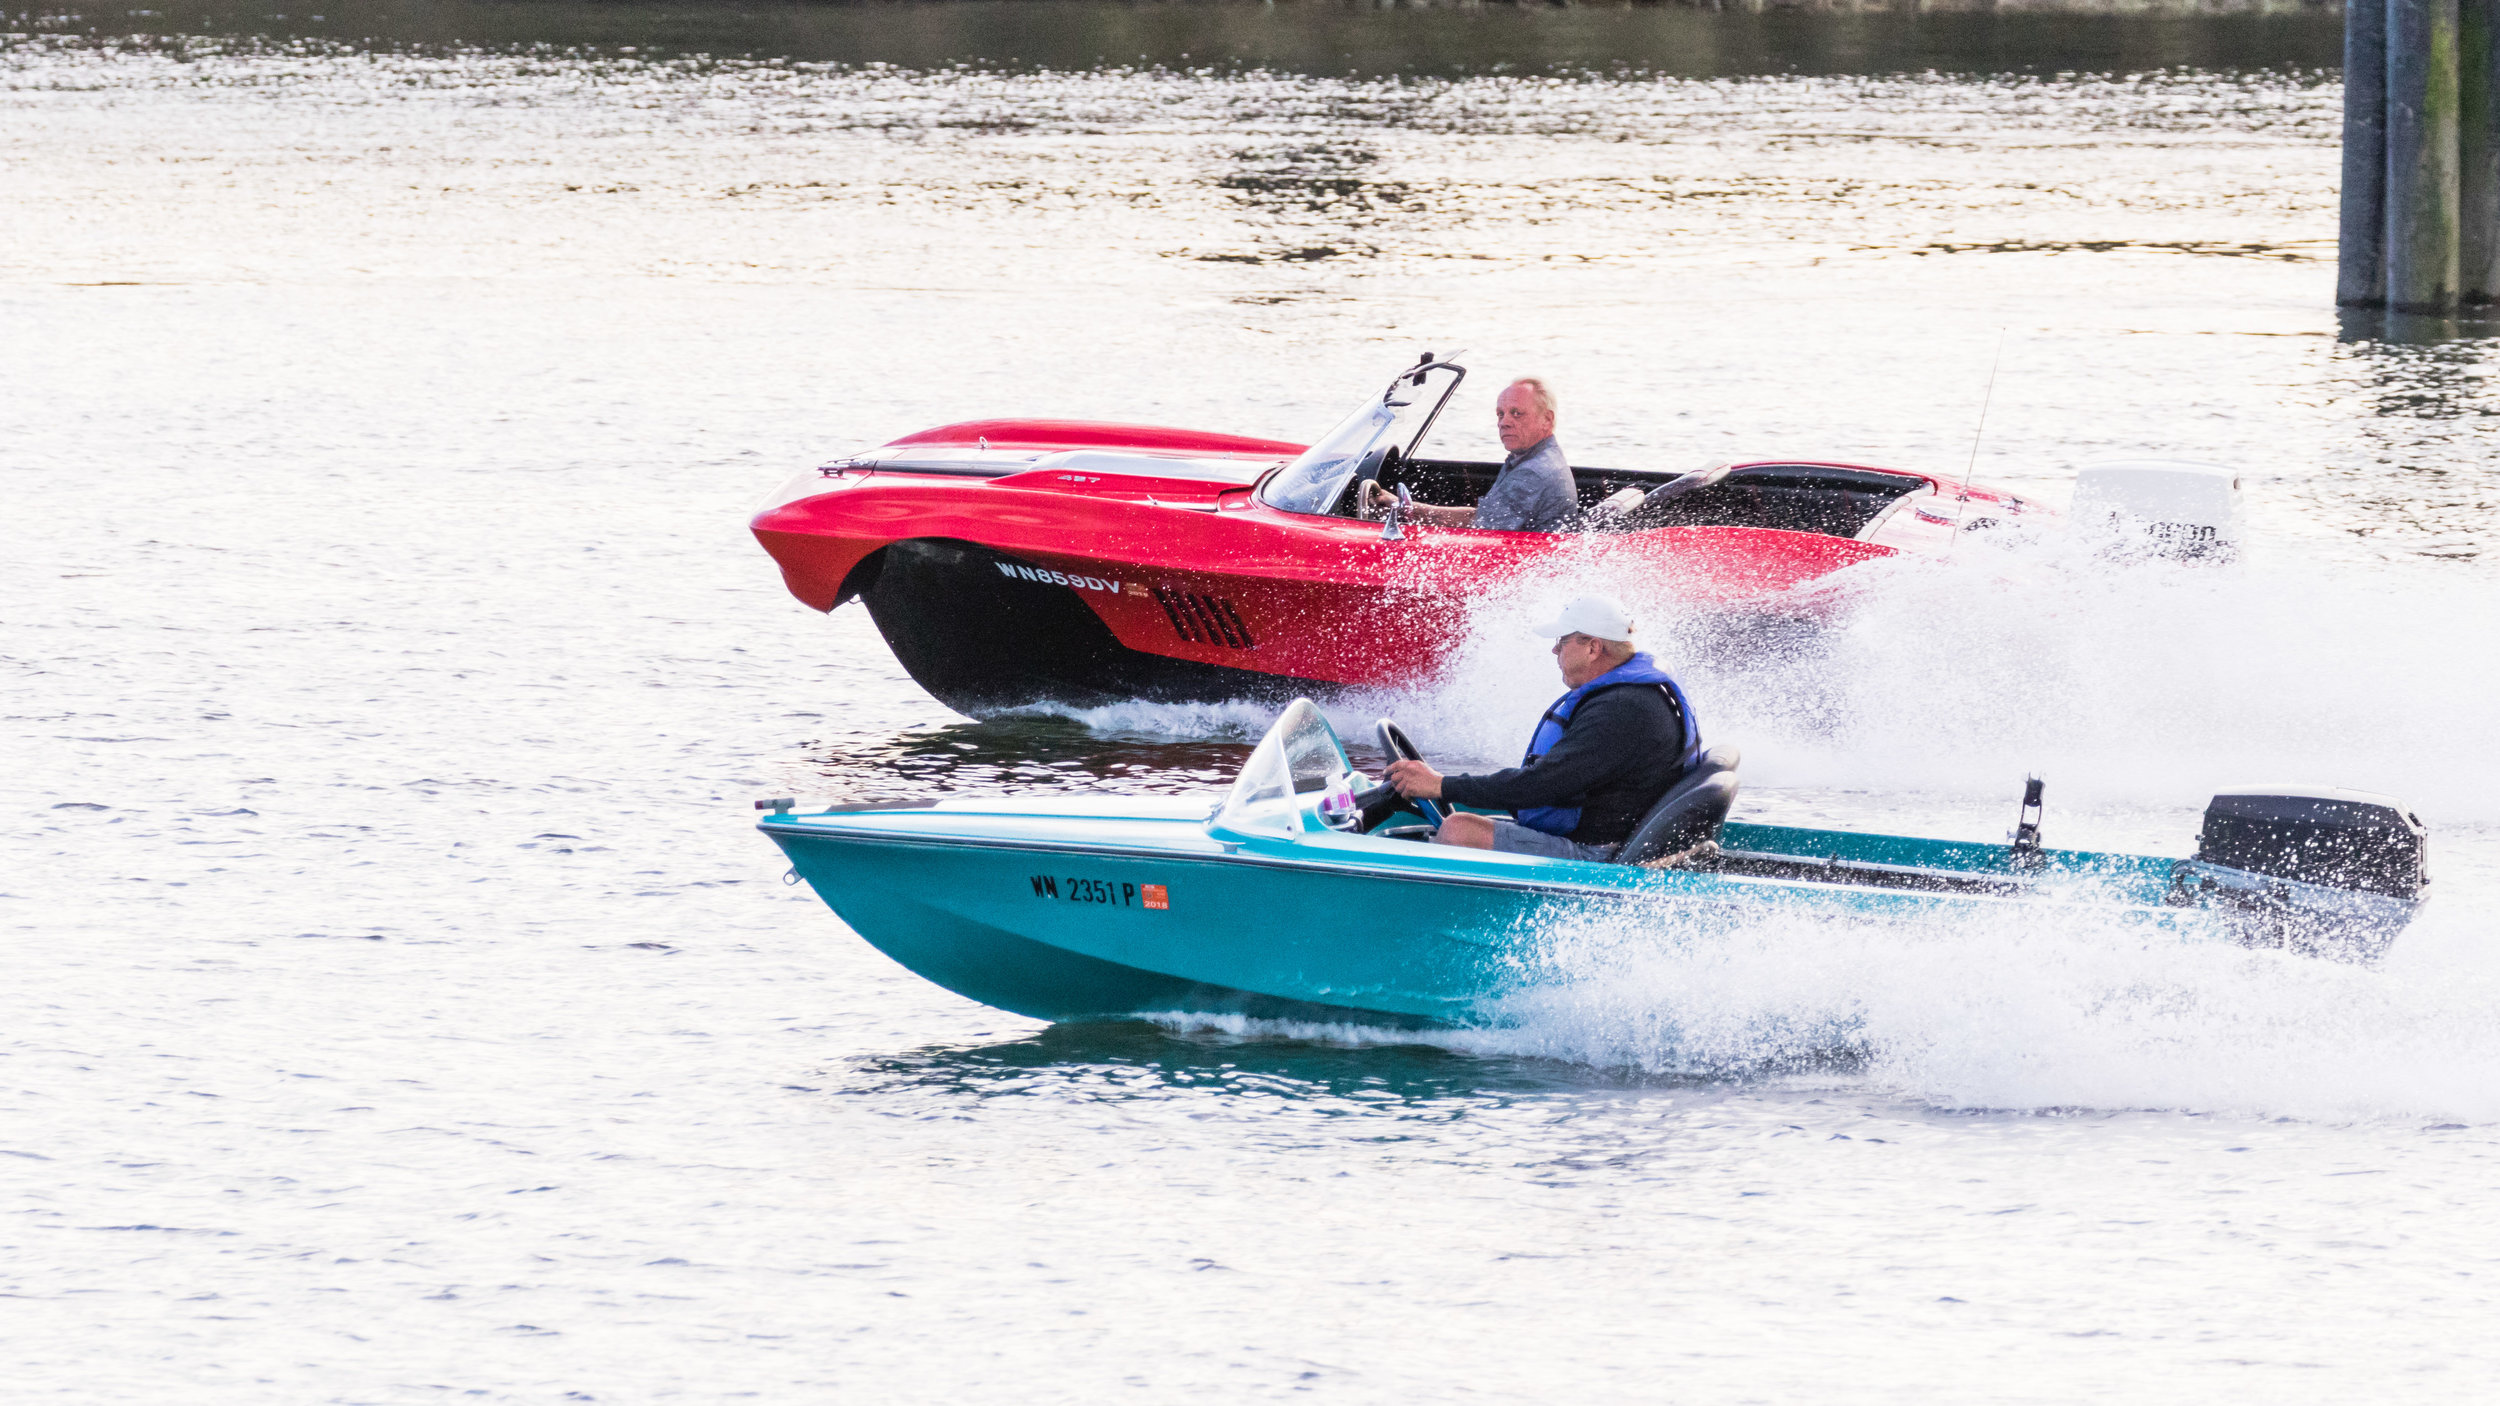 Racing on the Snohomish River